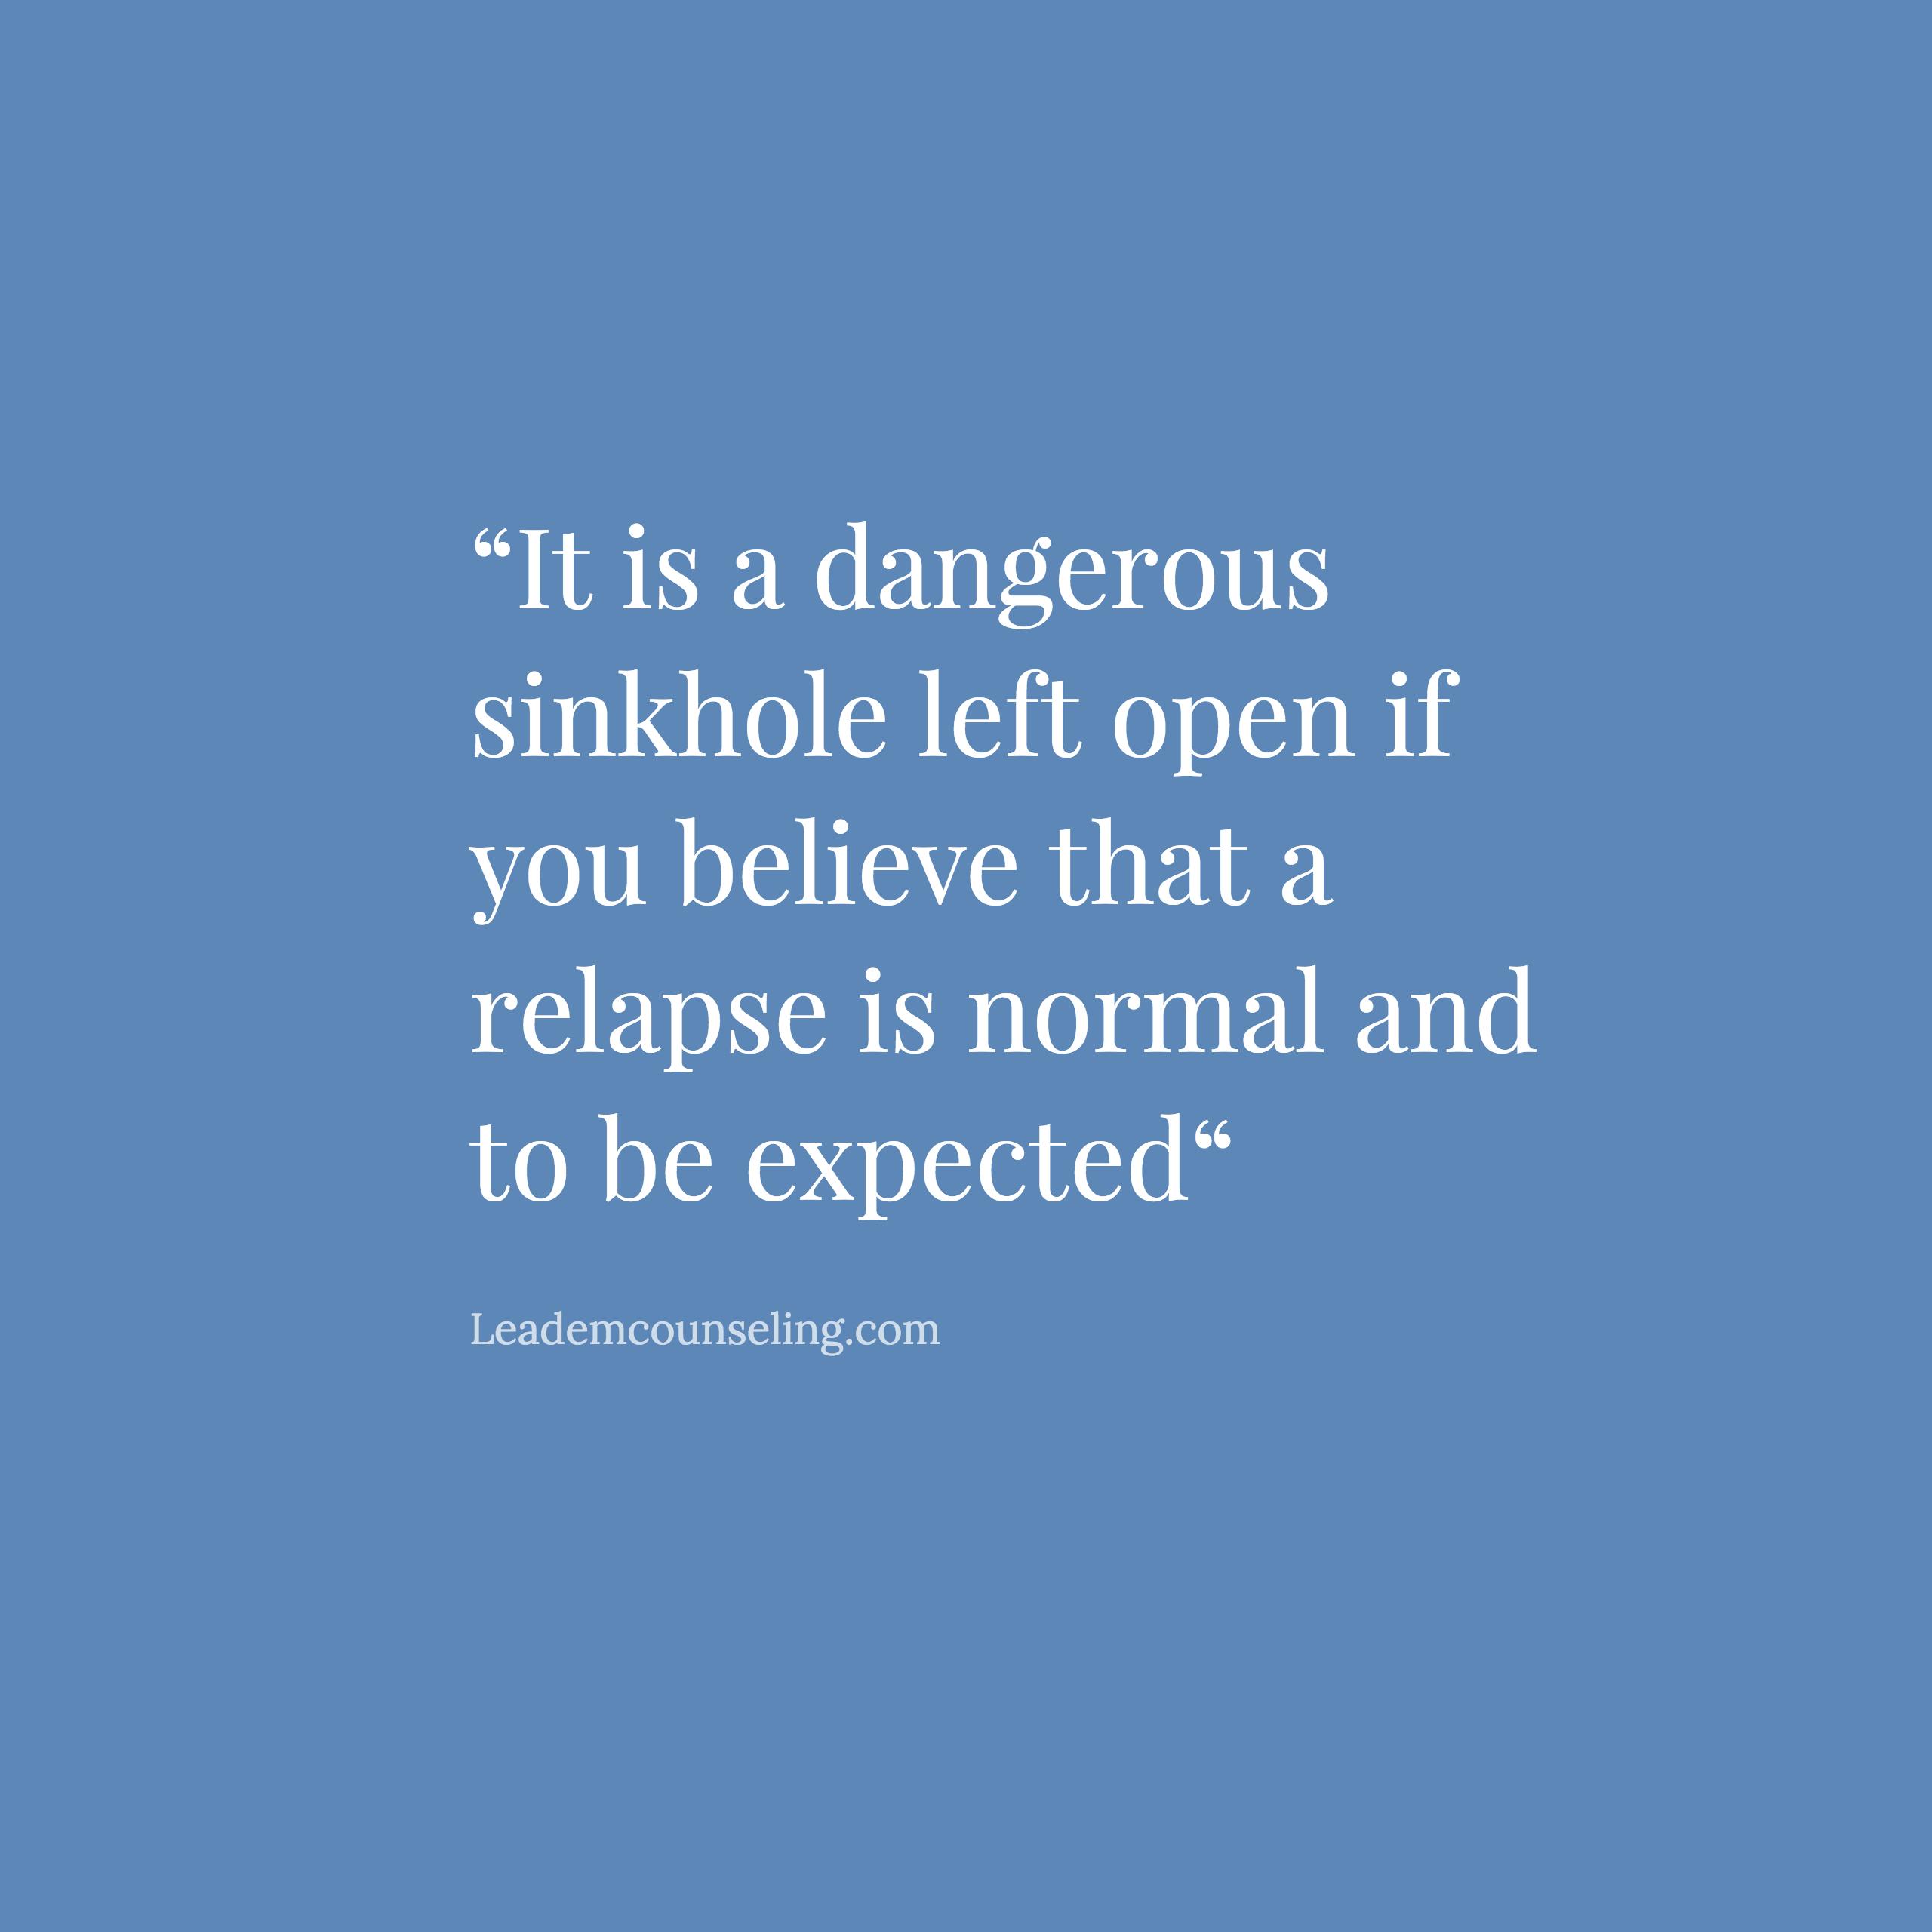 It is a dangerous sinkhole left open if you believe that a relapse is normal and to be expected